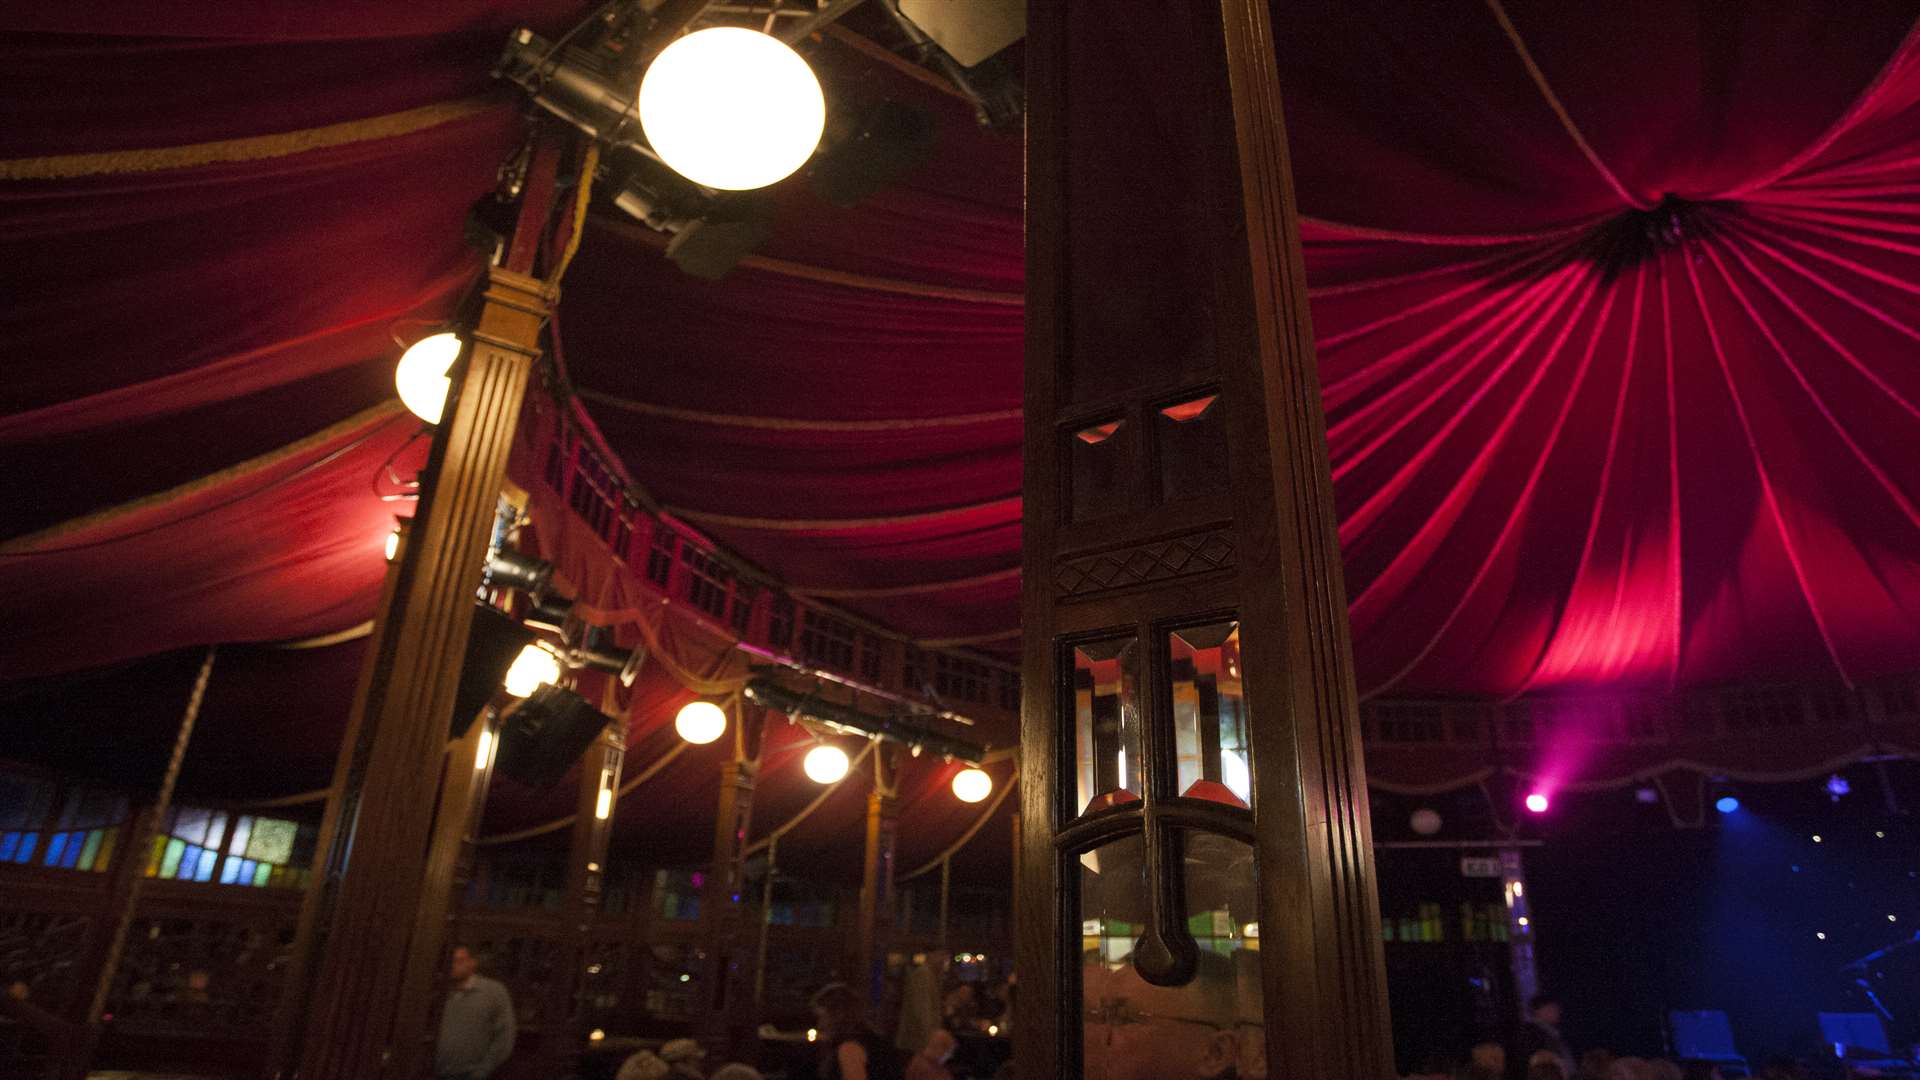 Inside the Speigeltent at Kingsmead car park where many of the events take place